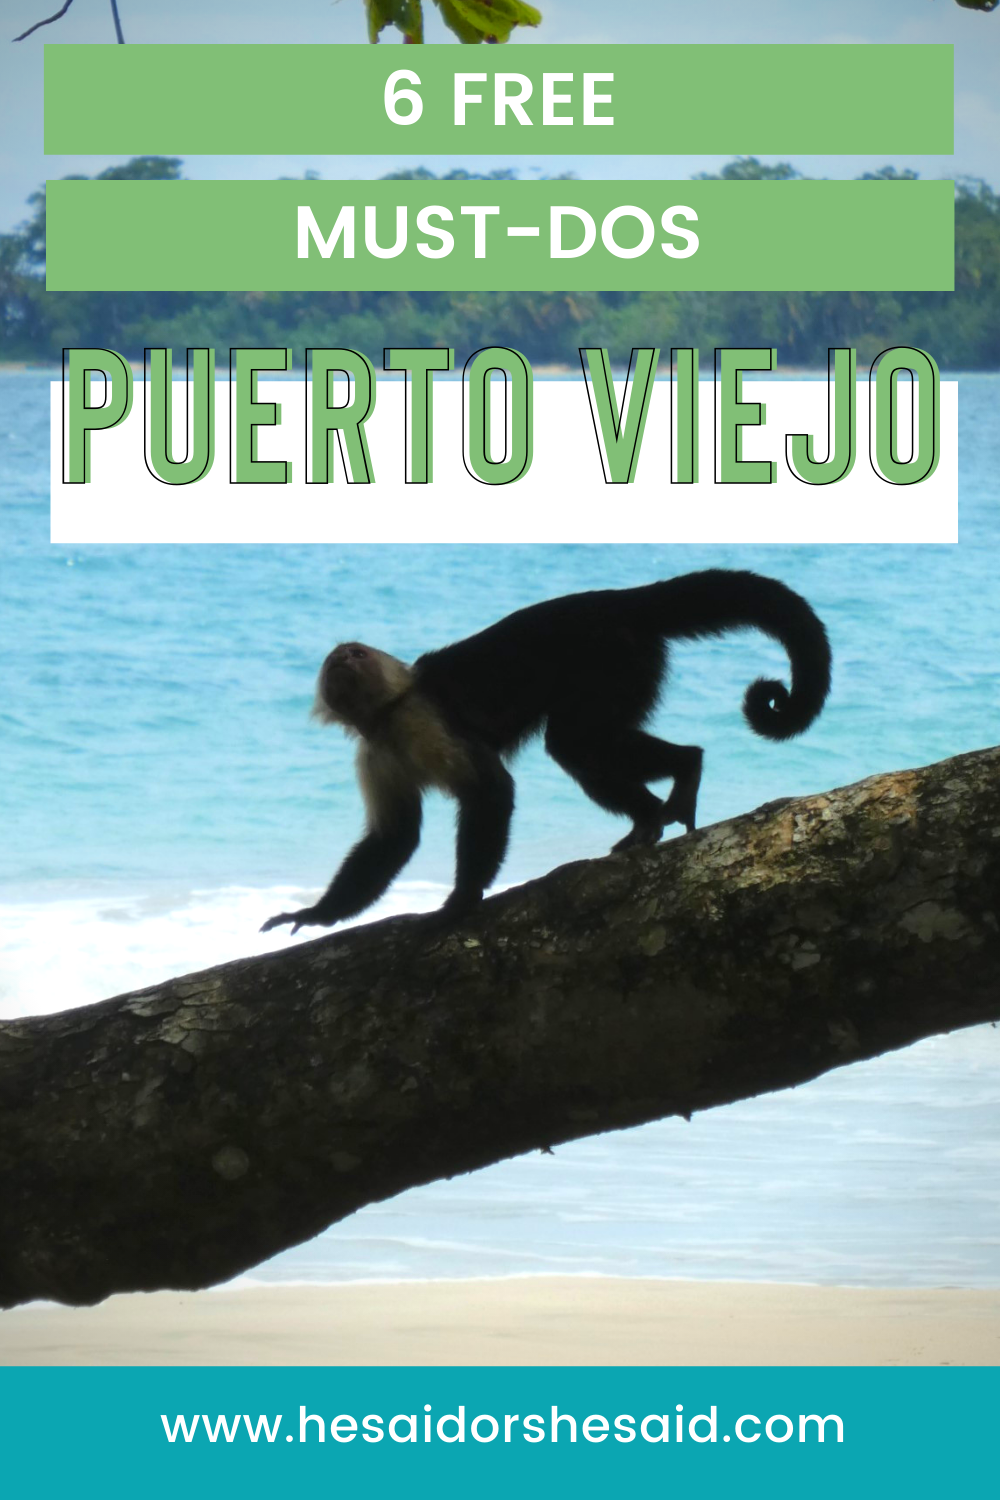 6 Free Must-Dos when in Puerto Viejo by hesaidorshesaid